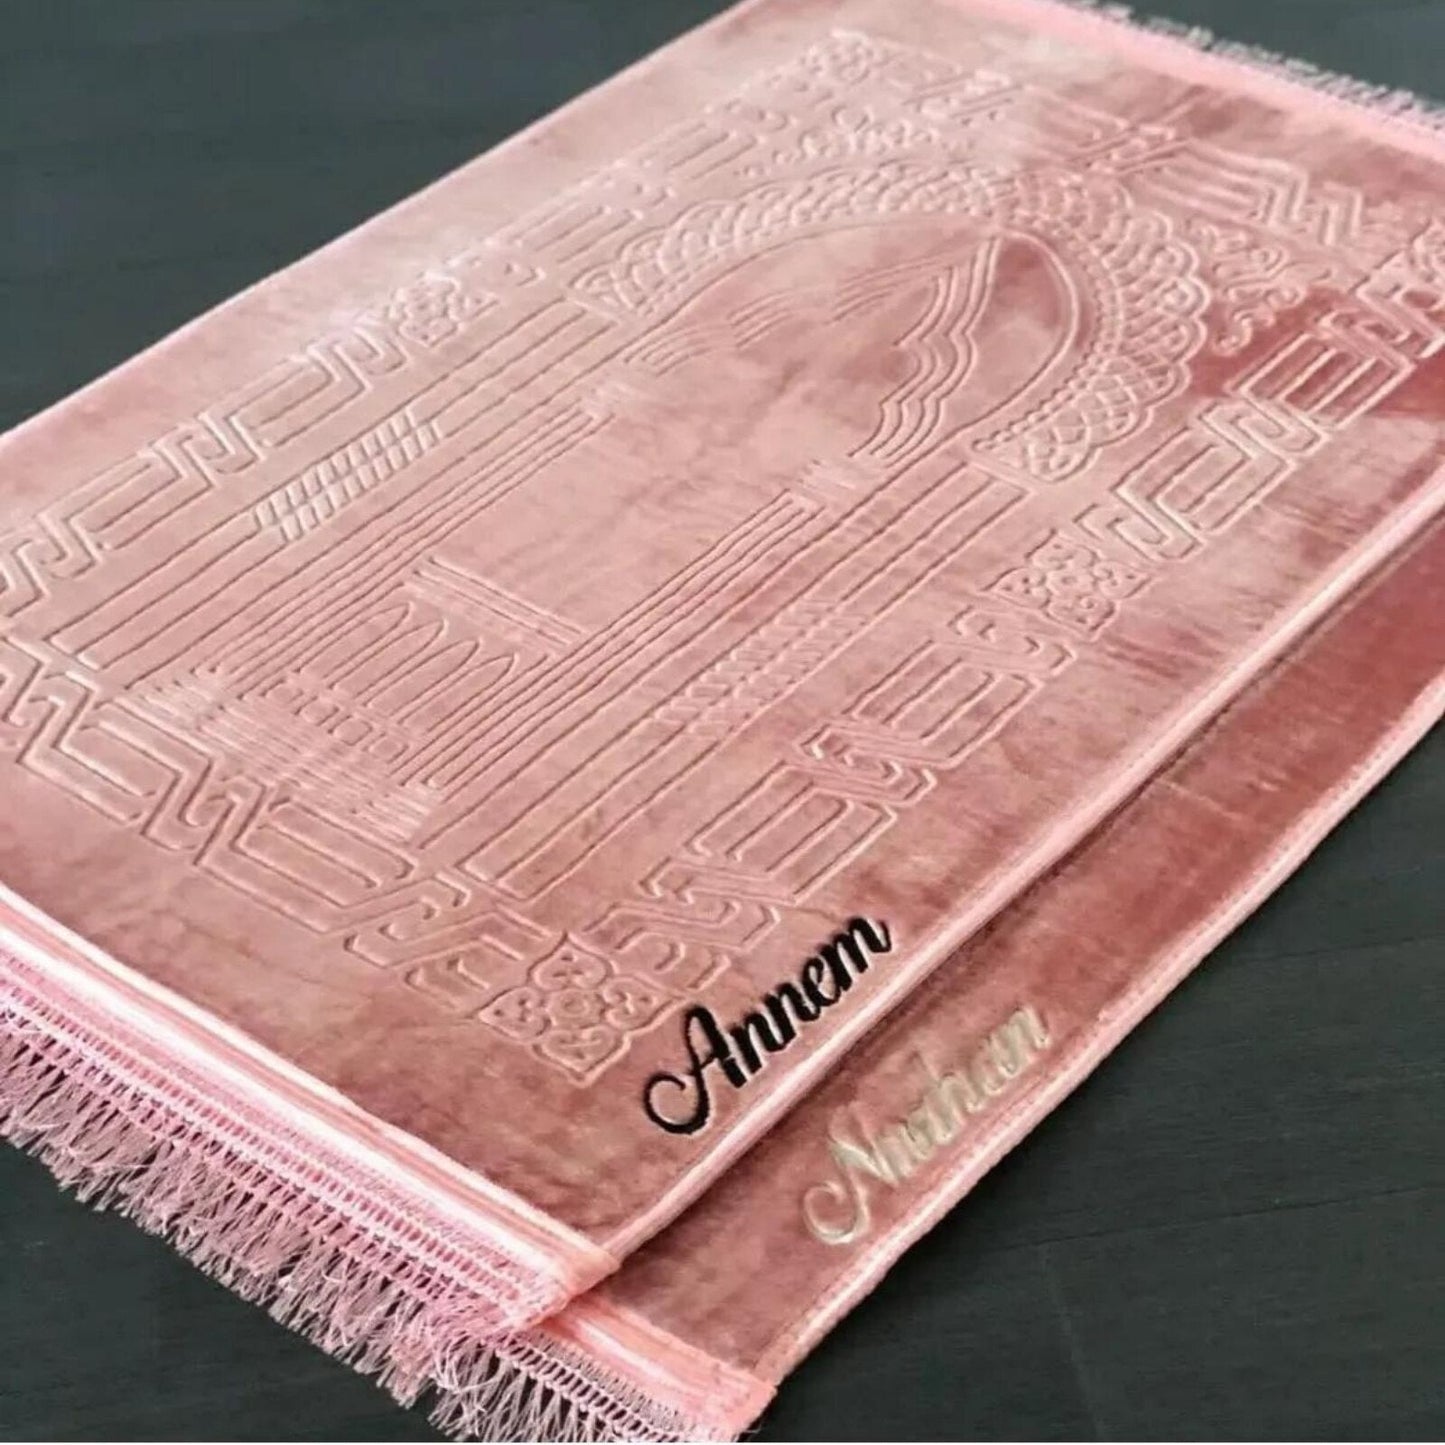 Customized Hand Woven Prayer Rug: Premium Thick Islamic Prayer Mat - Perfect for Ramadan, Eid, Weddings, and Special Muslim Occasions